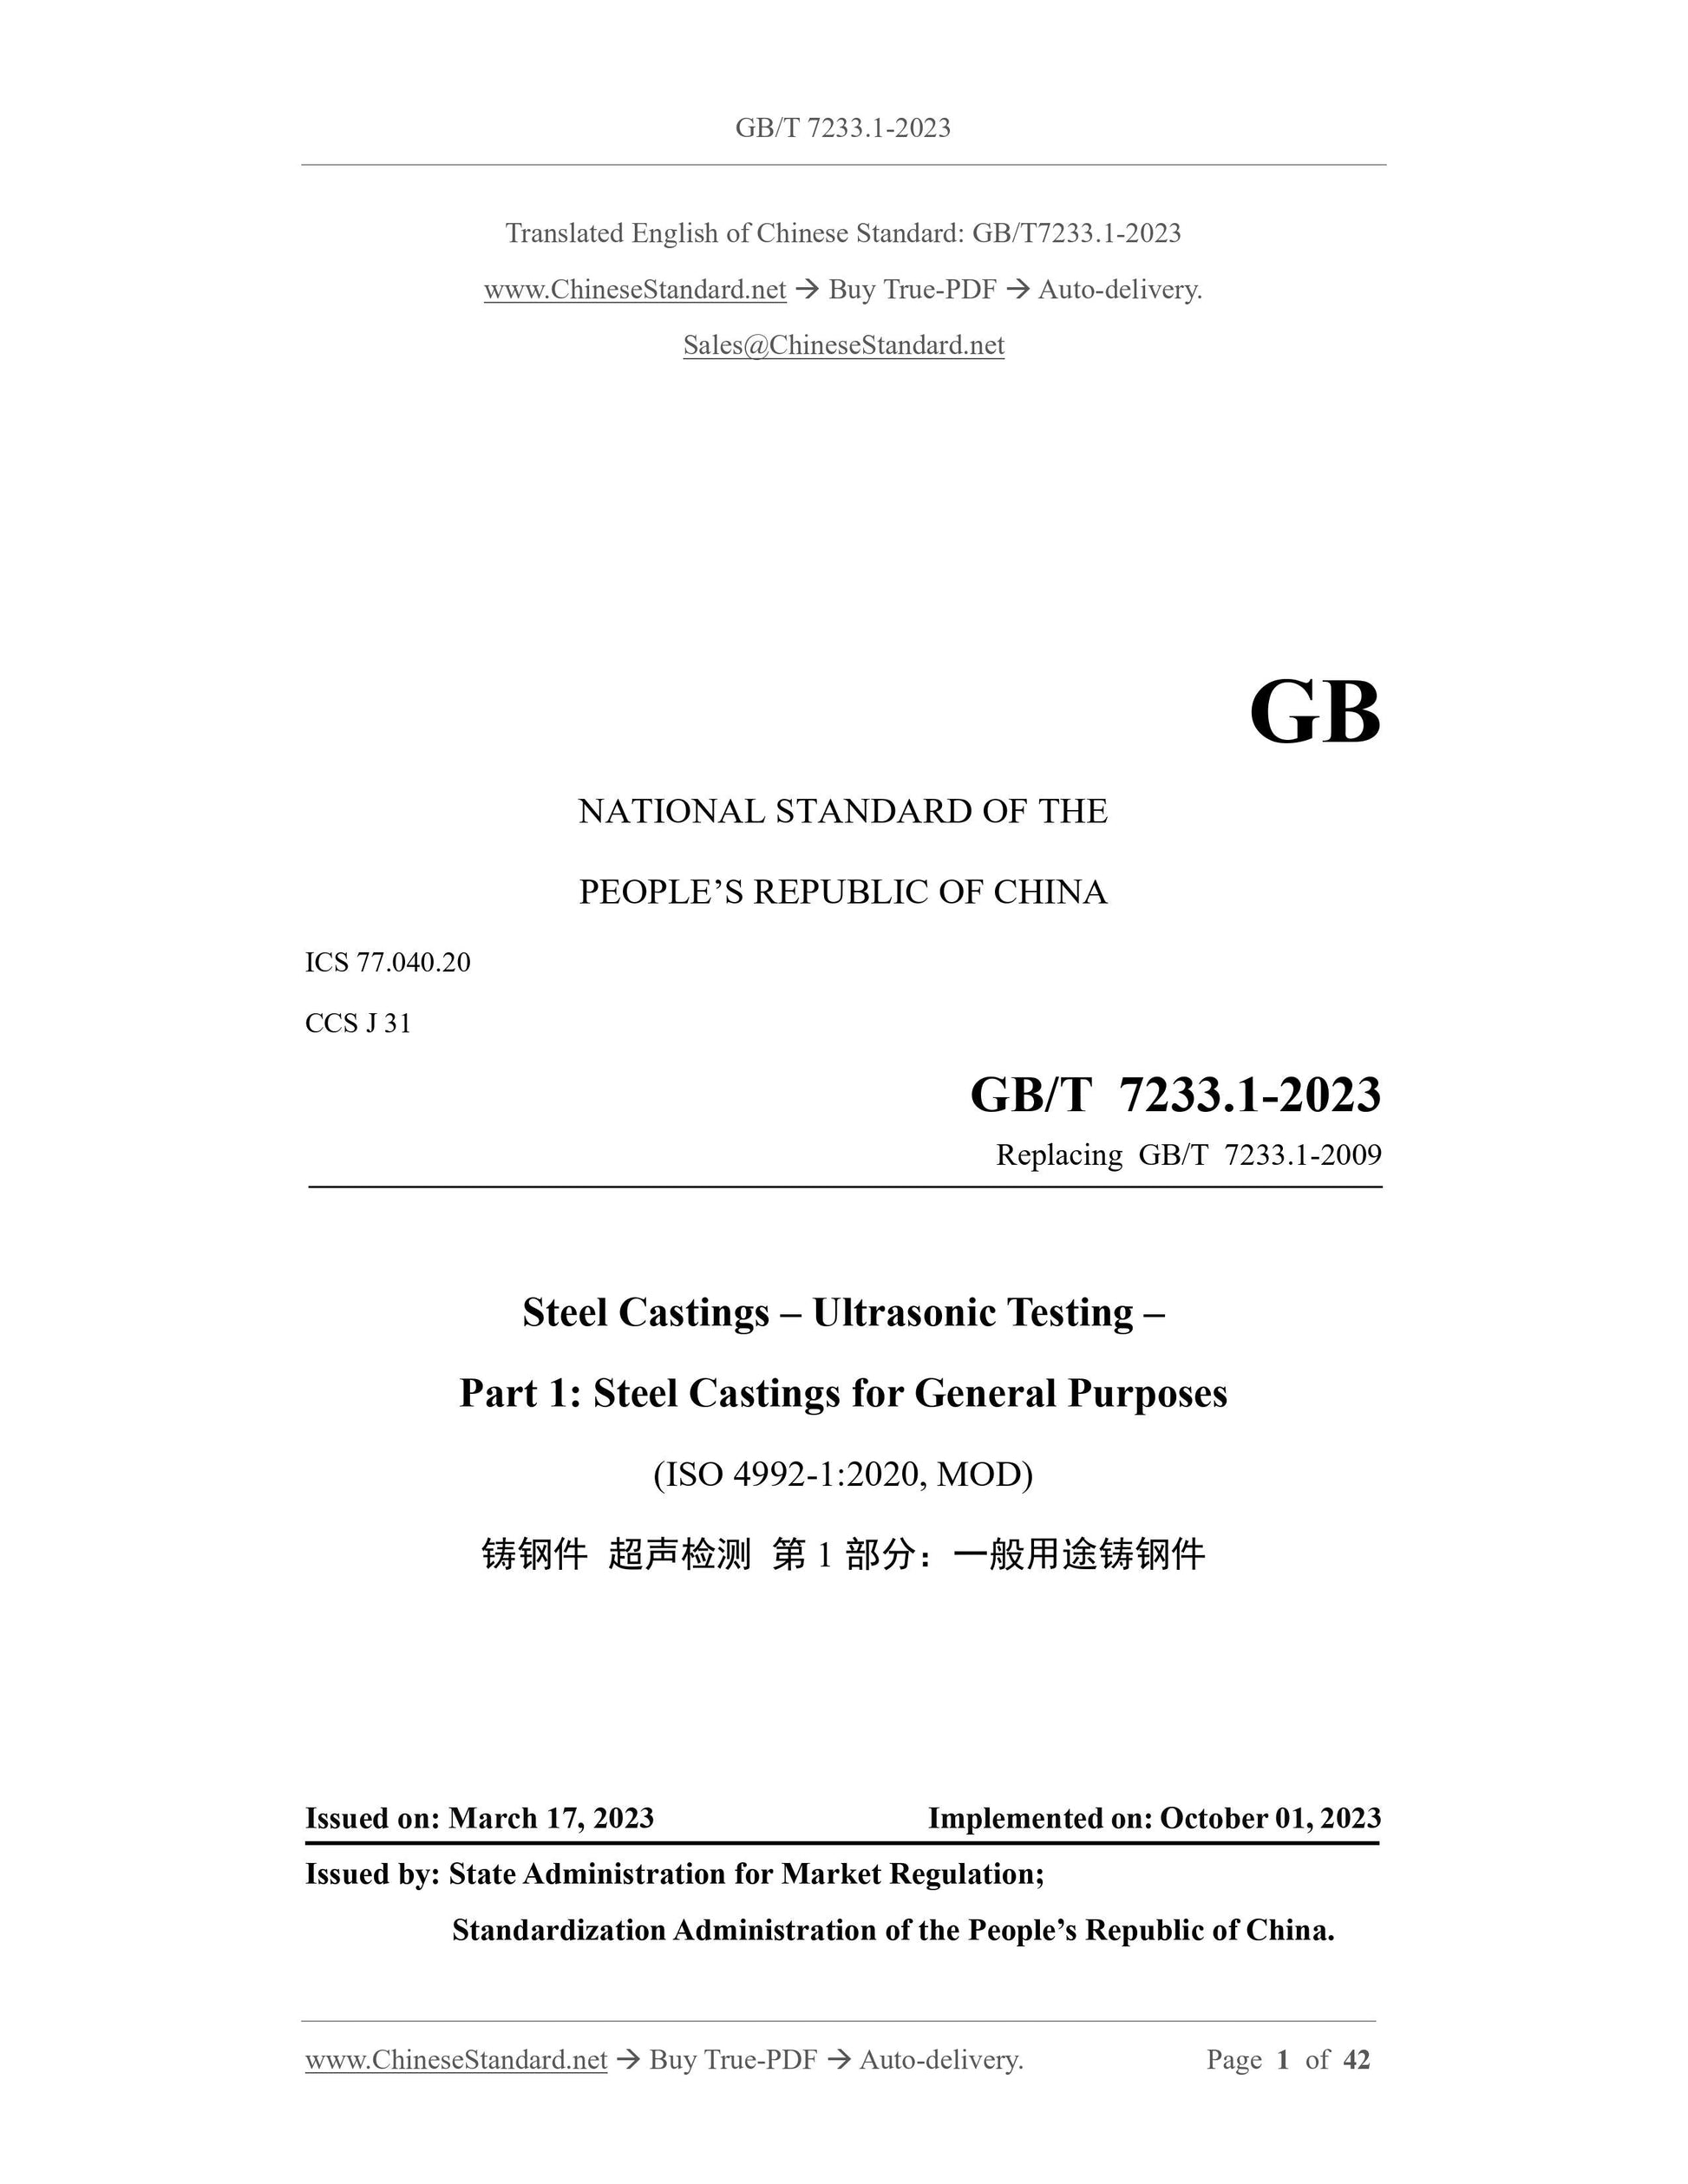 GB/T 7233.1-2023 Page 1